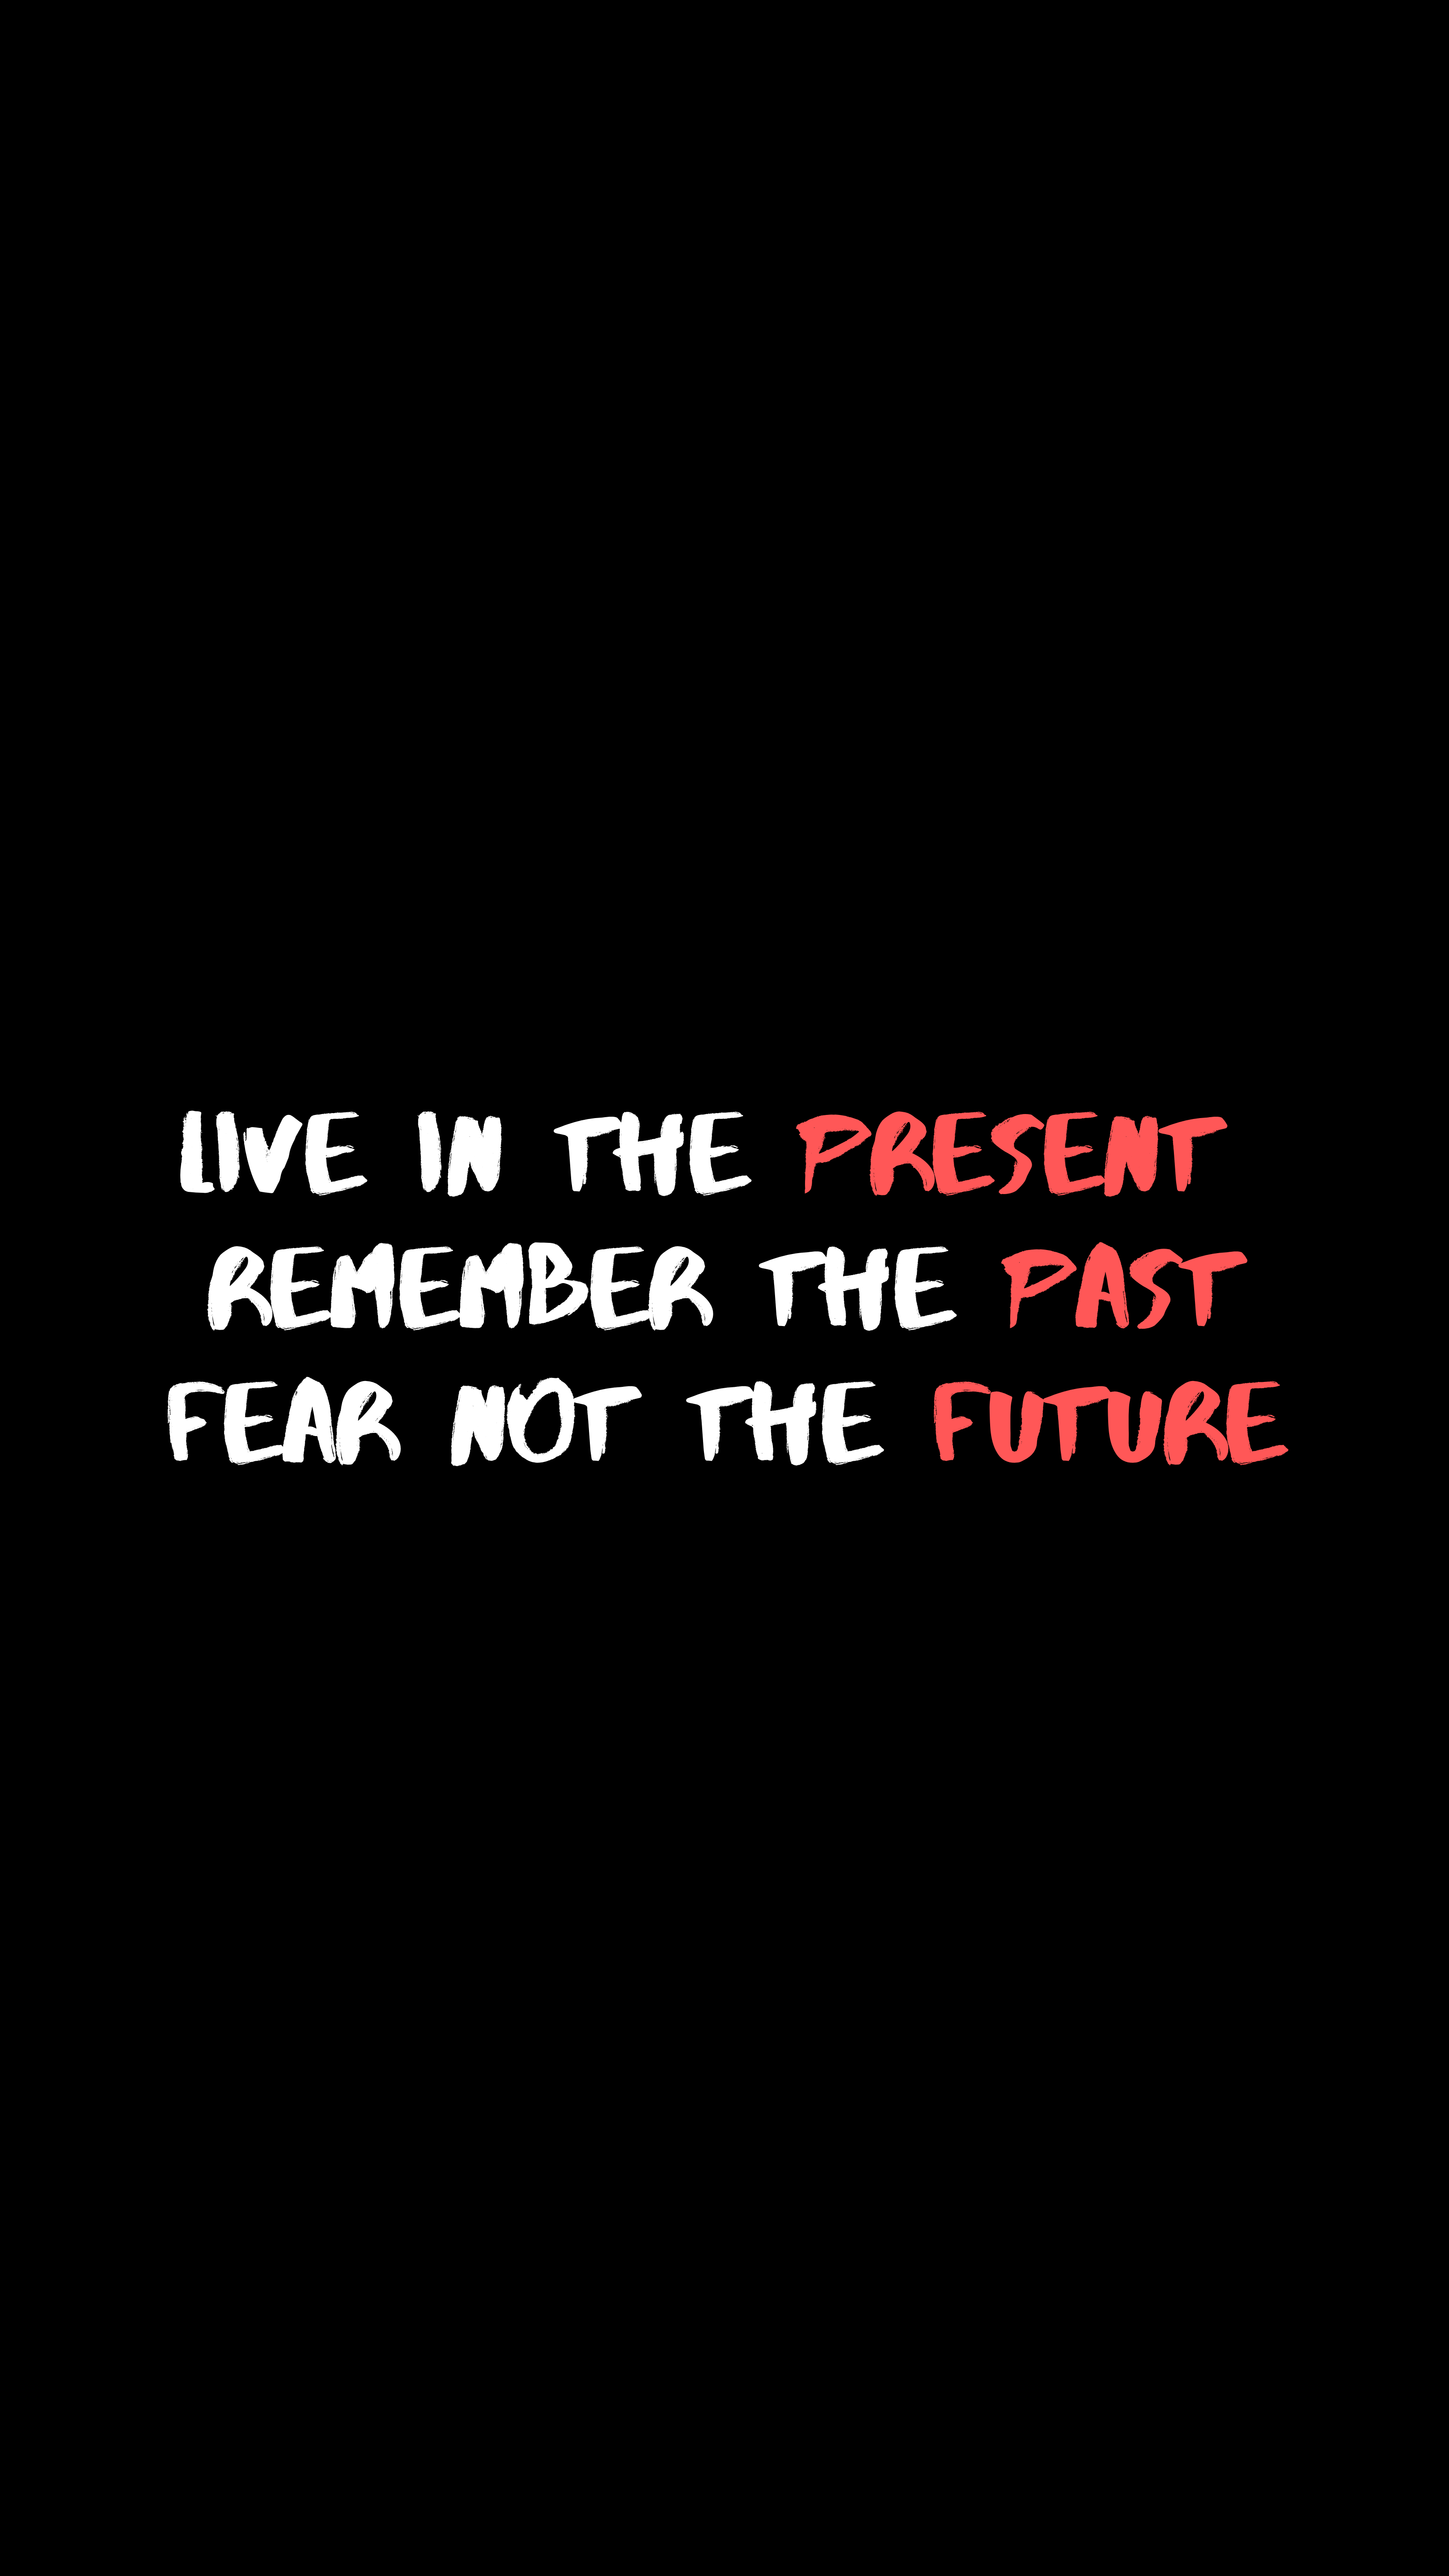 motivation, future, words, inspiration, quotation, quote, present, past Full HD